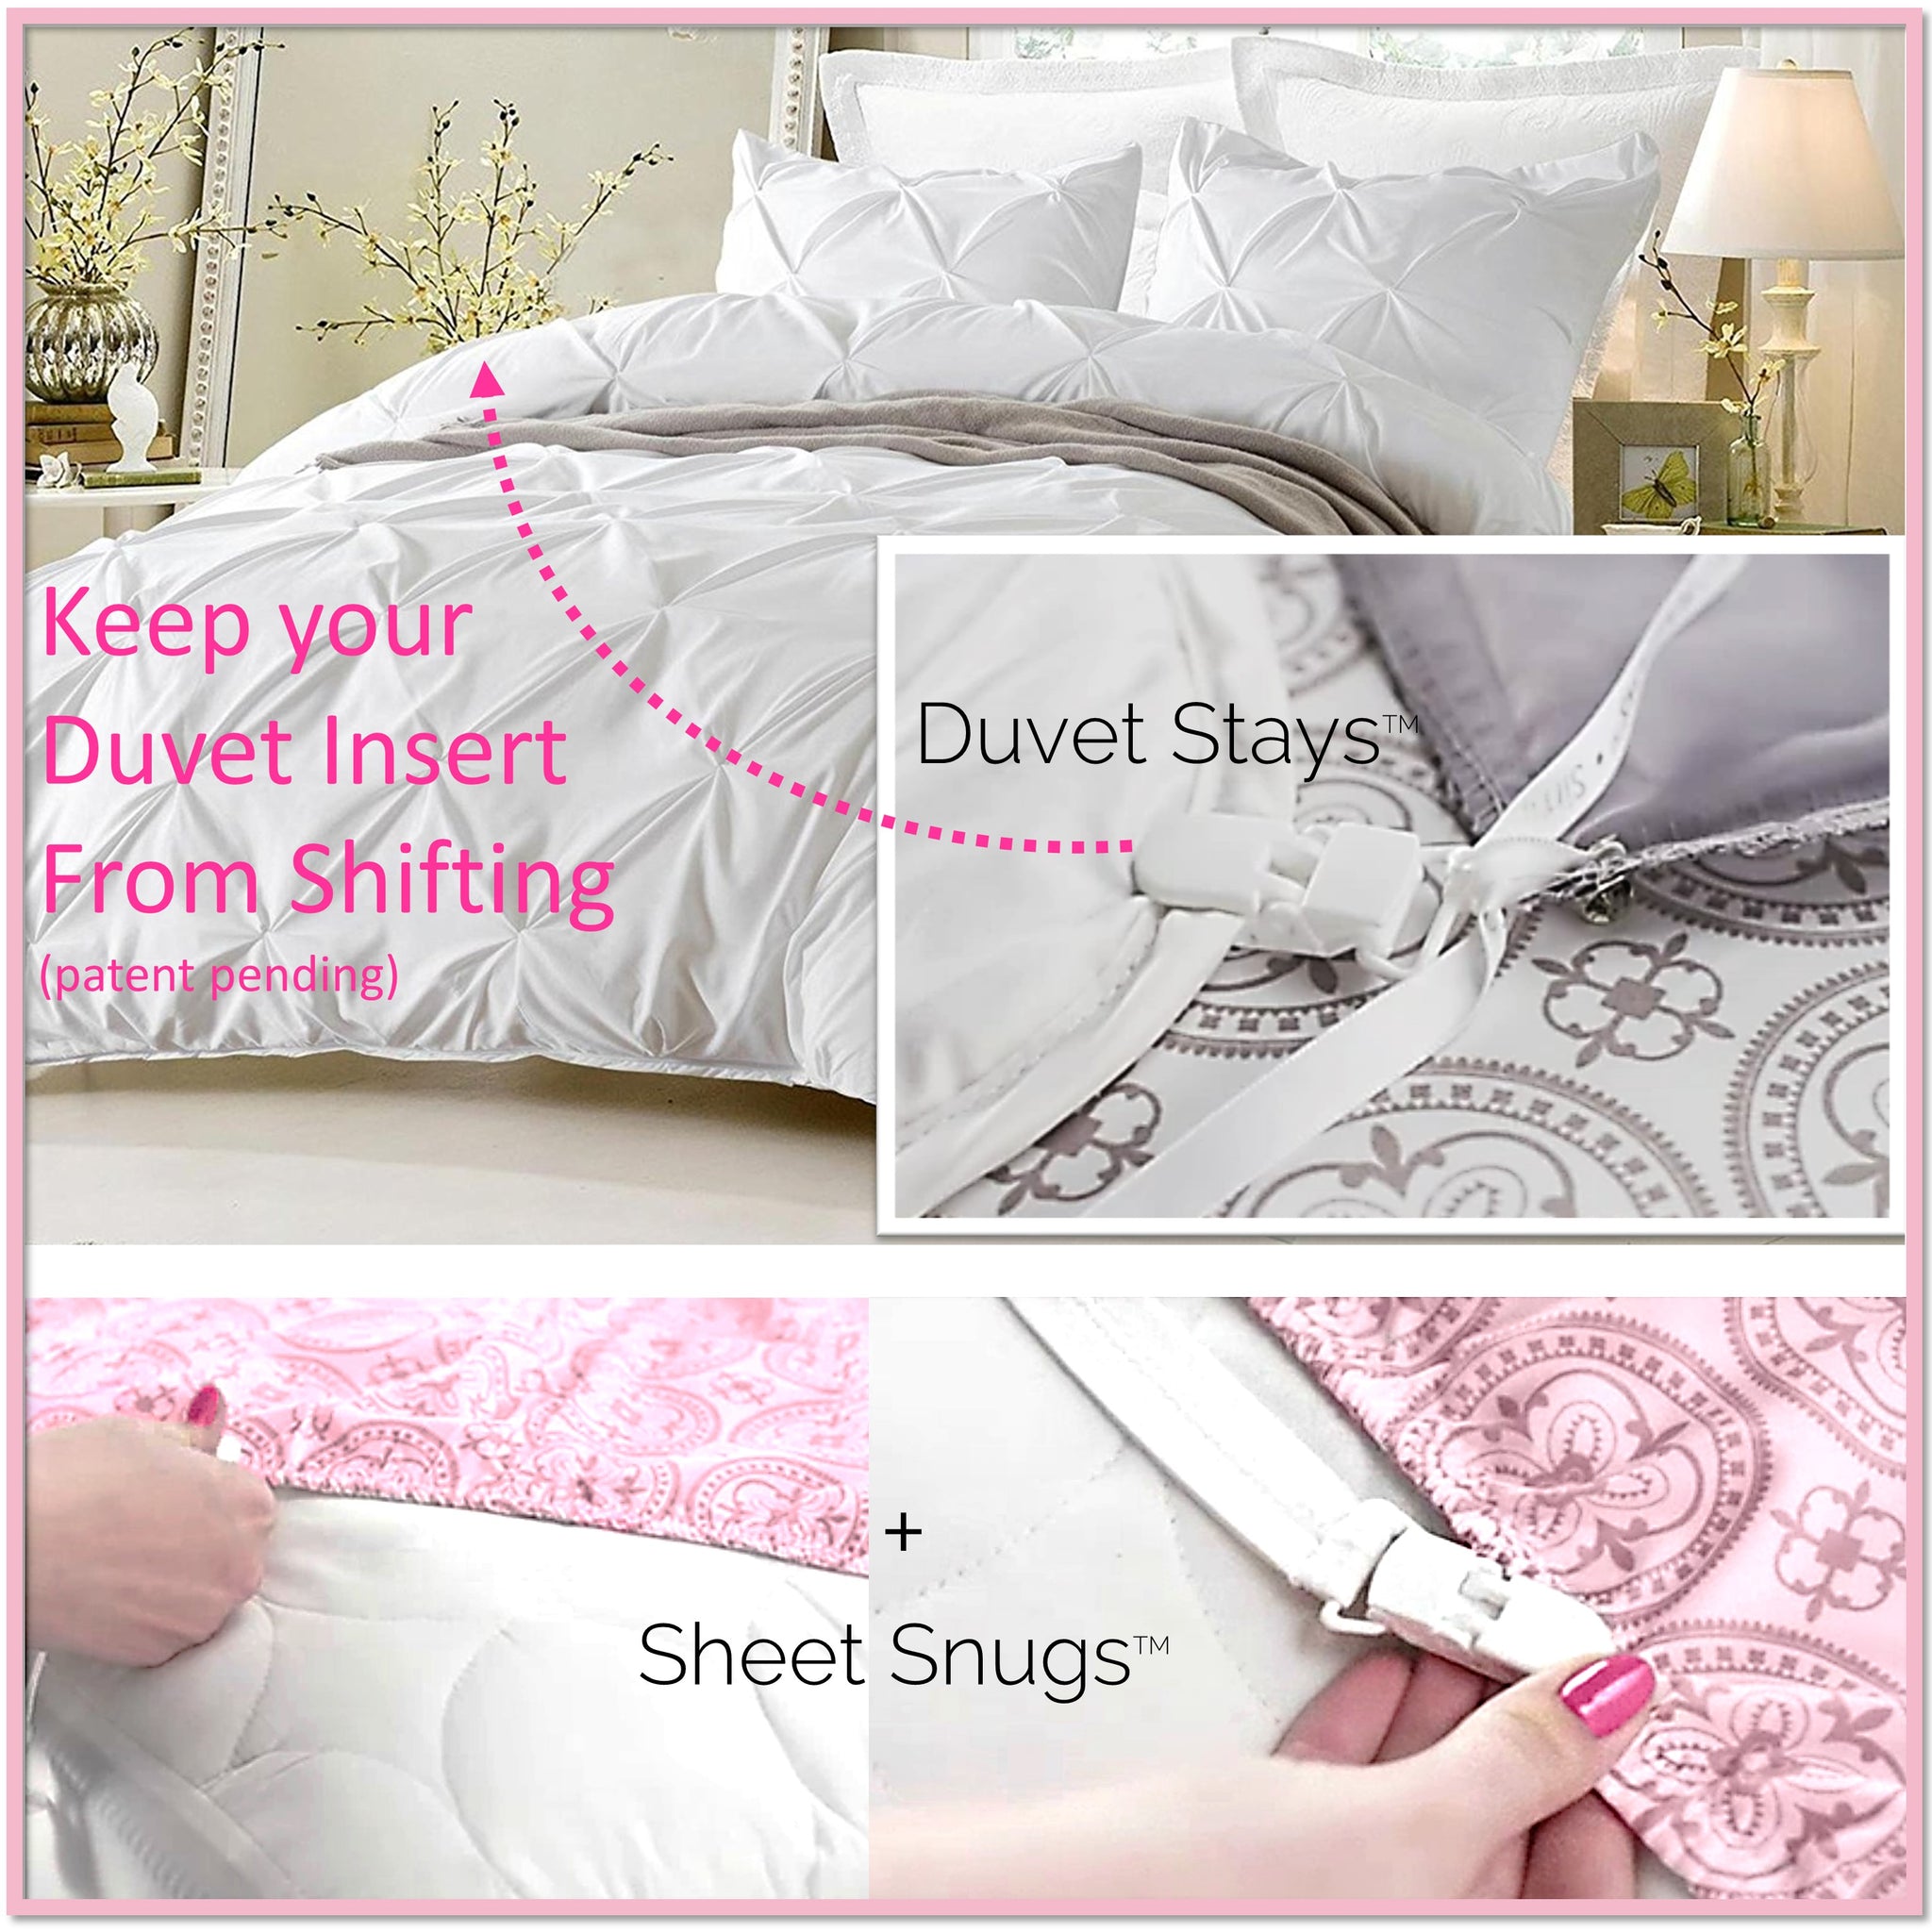 https://boottique.com/cdn/shop/products/2018_Web_Image_Duvet_Stays_and_Sheet_Snugs_Lifestyle_Image_Square_2048x.jpg?v=1549582181